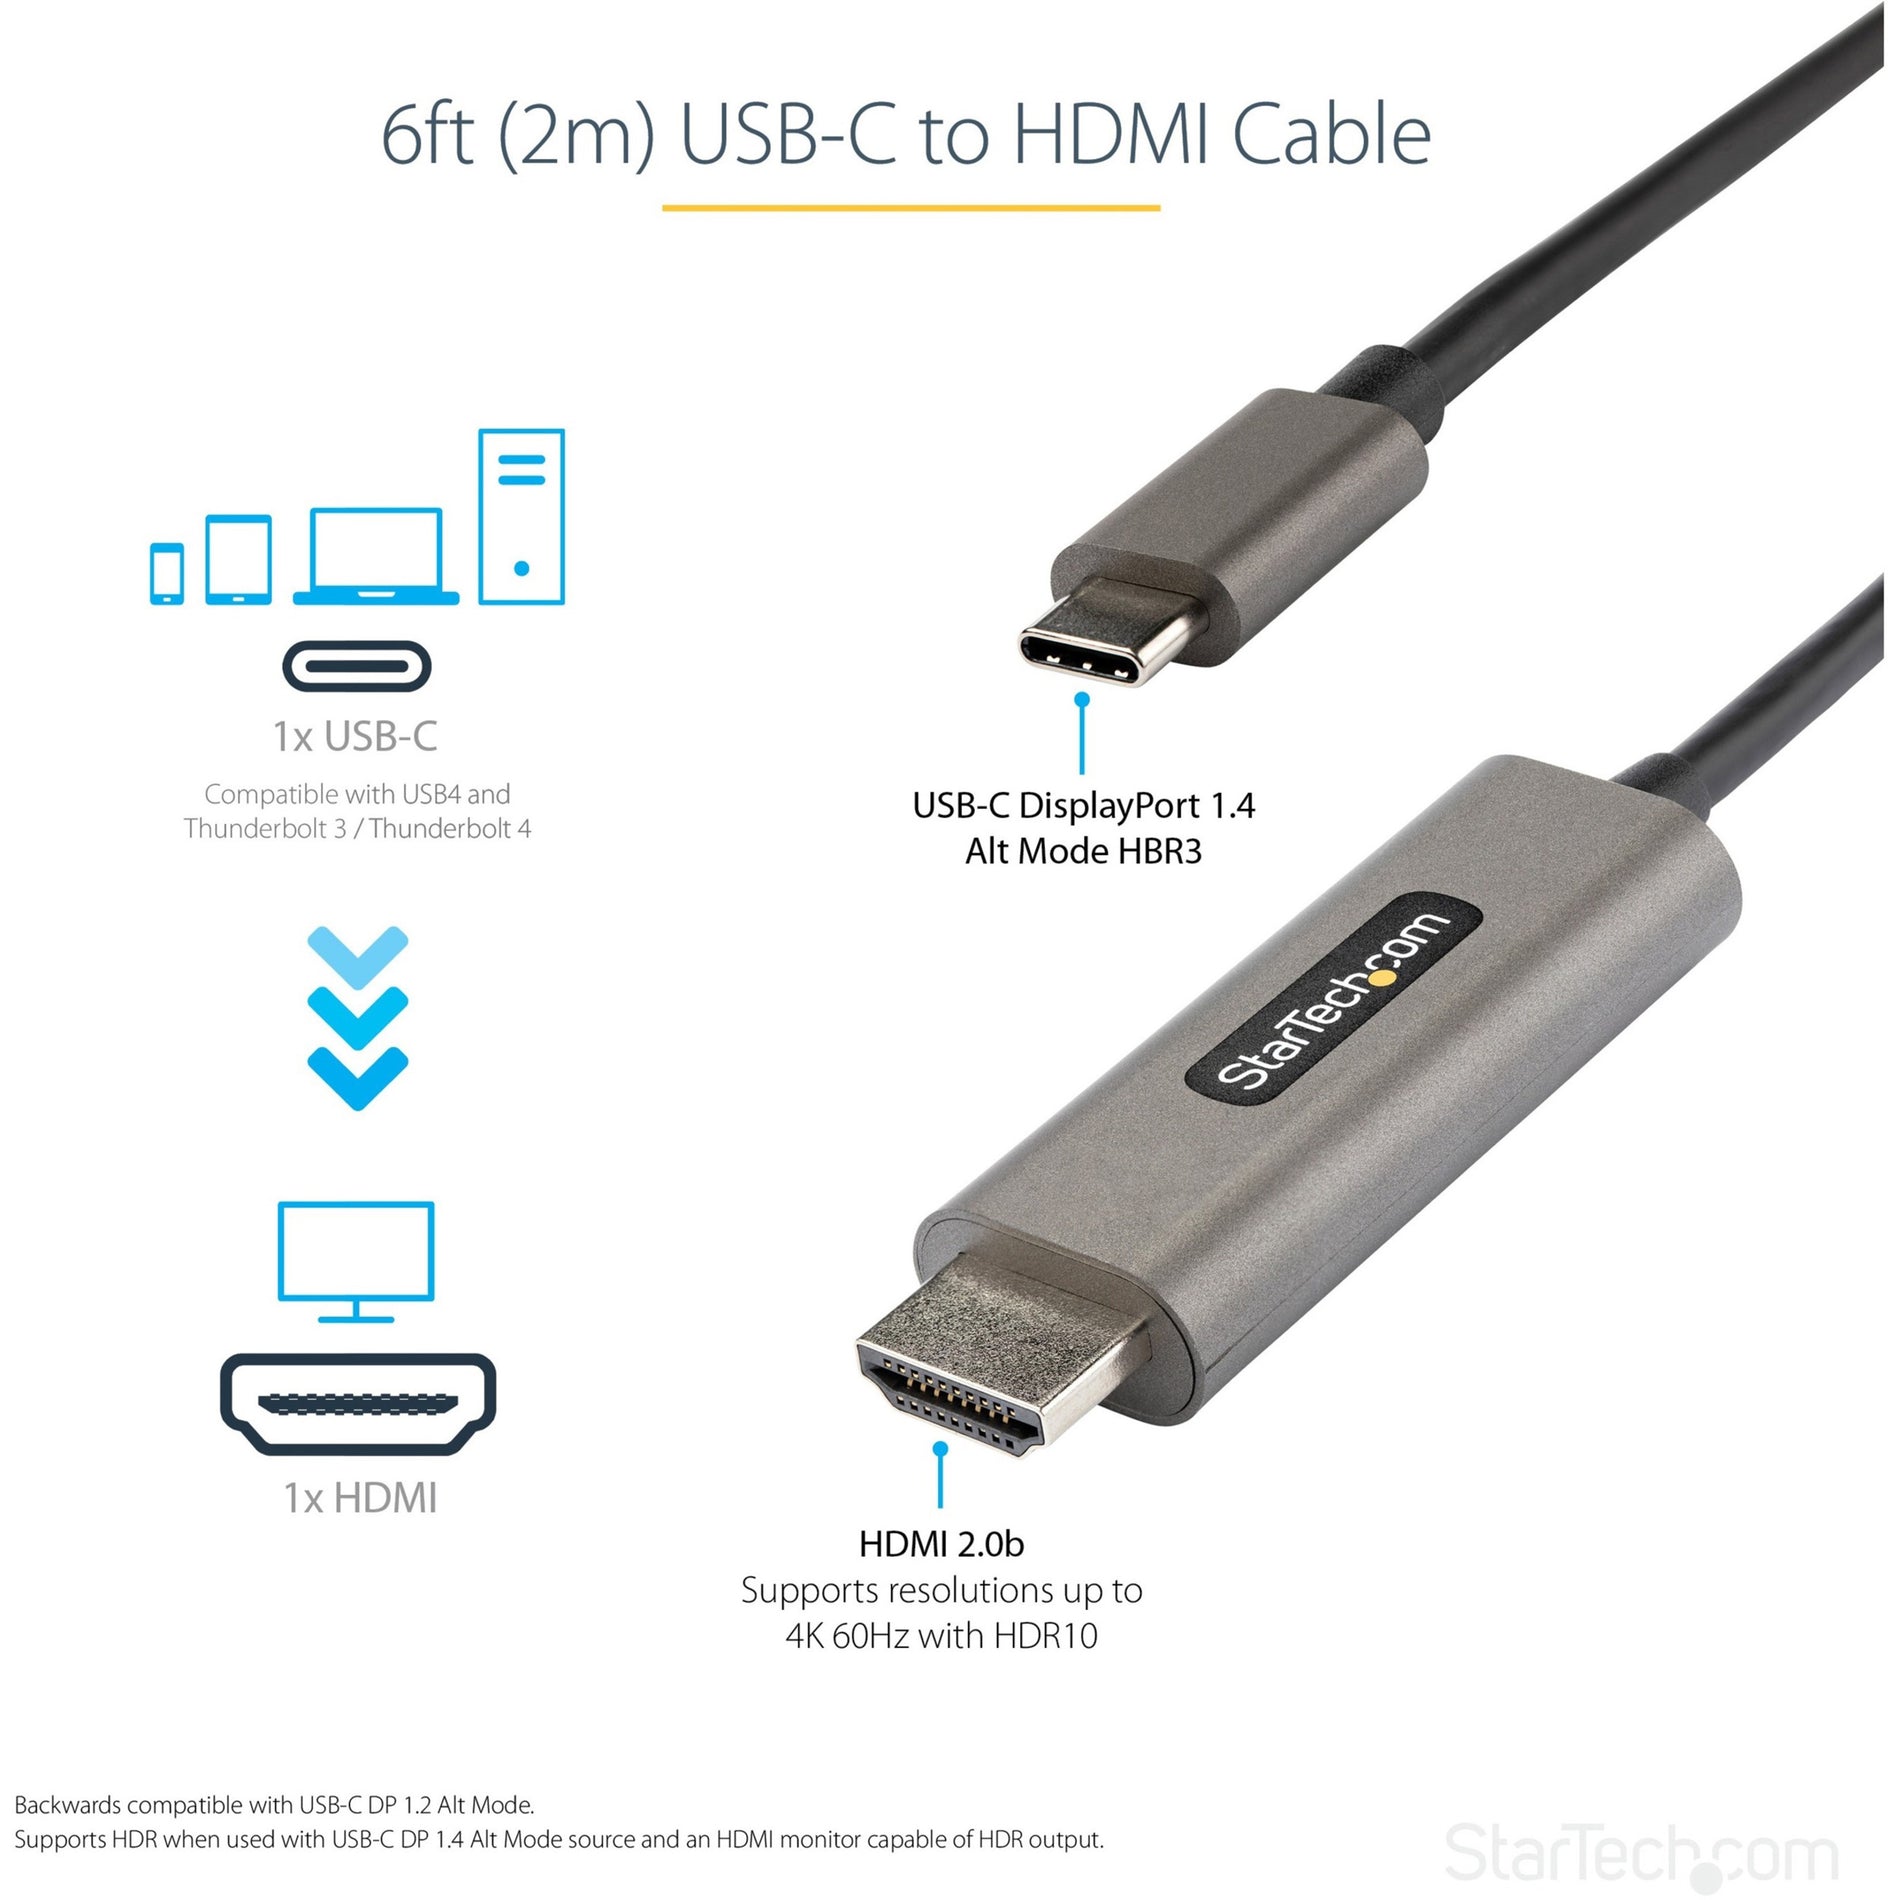 StarTech.com CDP2HDMM2MH 6ft USB C to HDMI Cable Adapter 4K 60Hz HDR10, Ultra HD HDMI 2.0b Video Cable Adapter